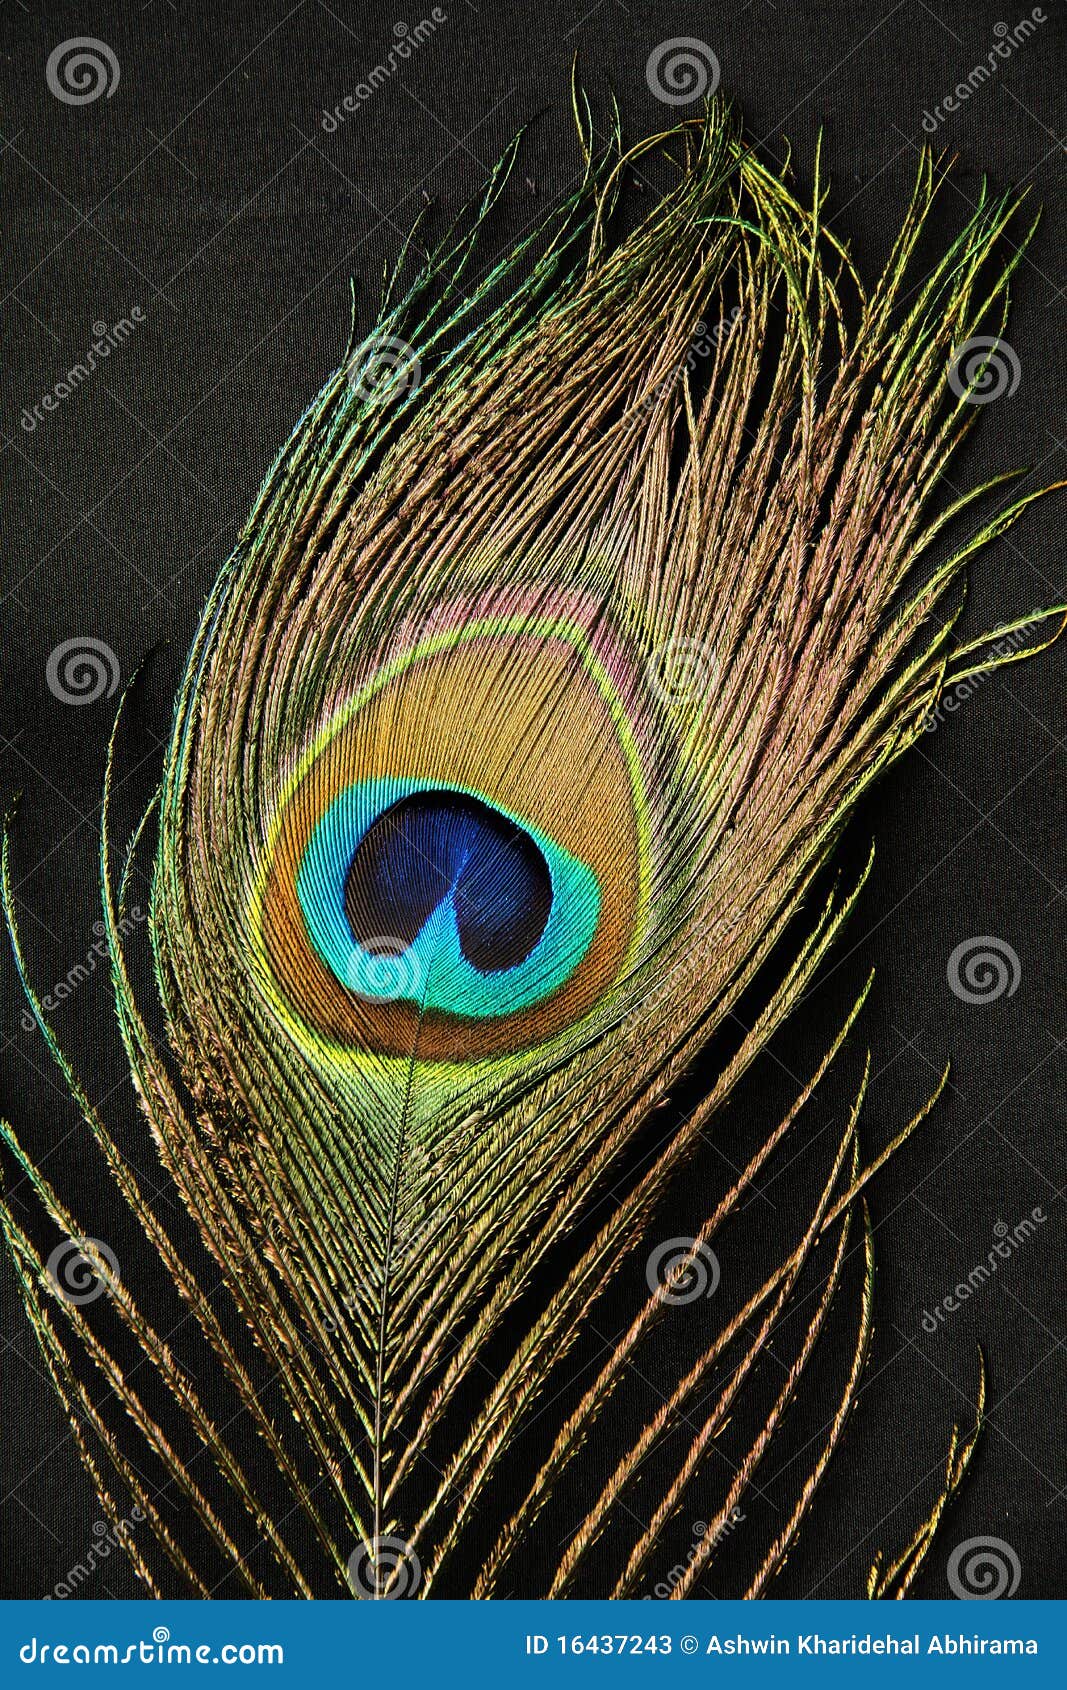 Peacock feather stock image. Image of organic, portrait - 16437243